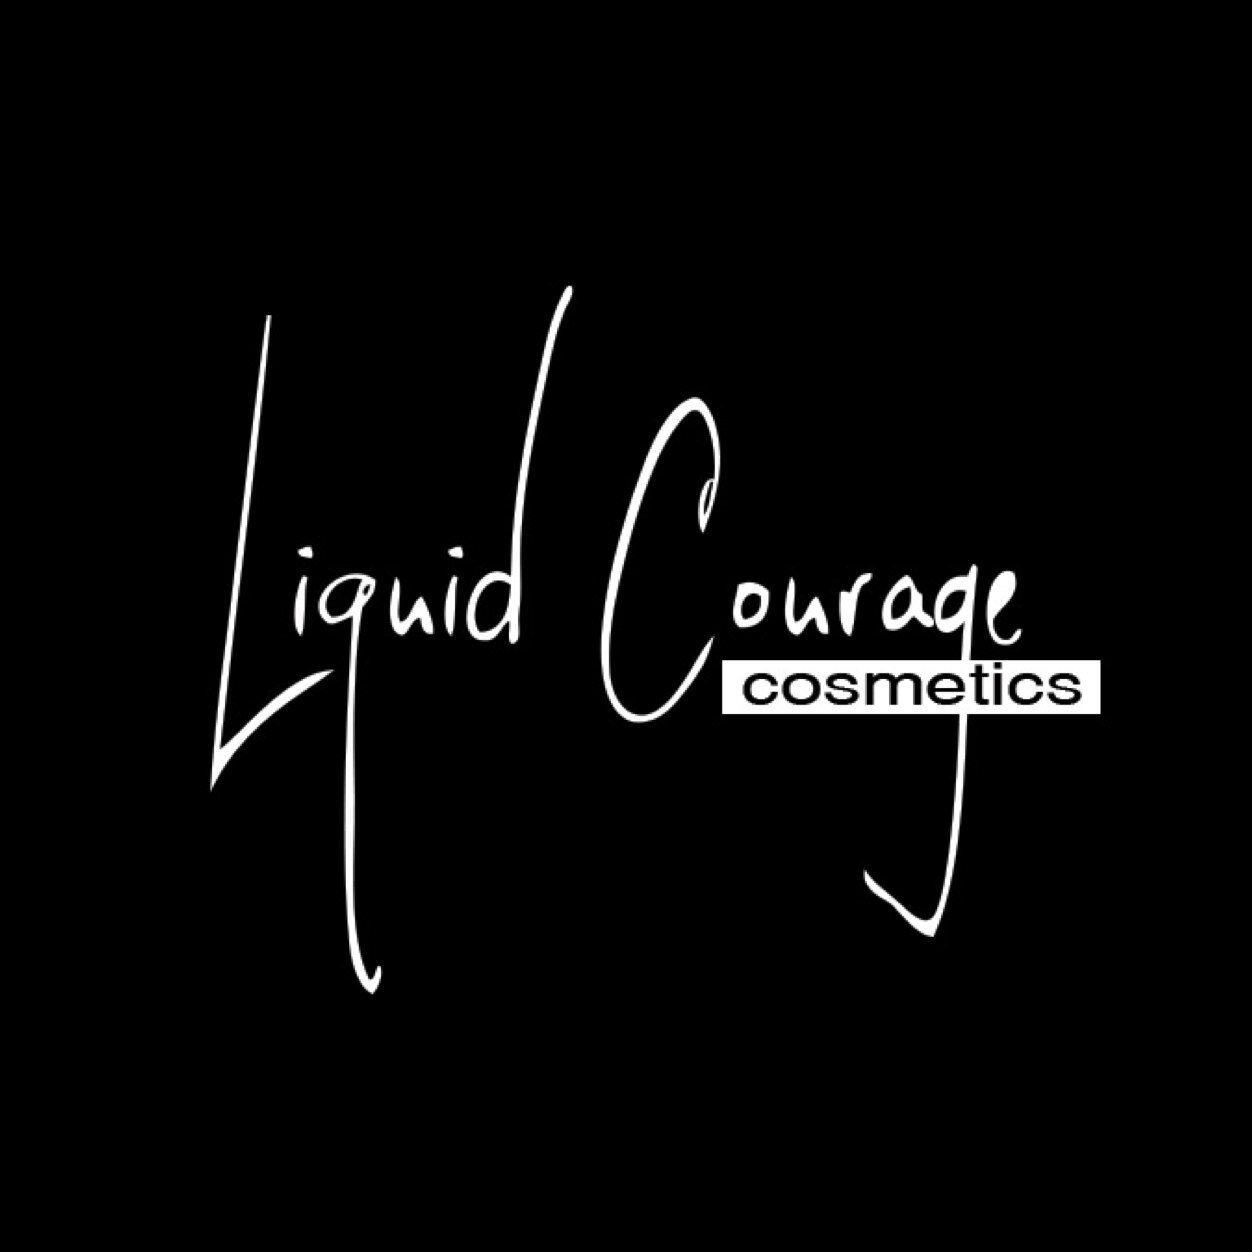 Real women are COURAGEOUS. Liquid Courage offers pigmented lipsticks and lacquers for the modern & mobile woman. Click on the link below to order.